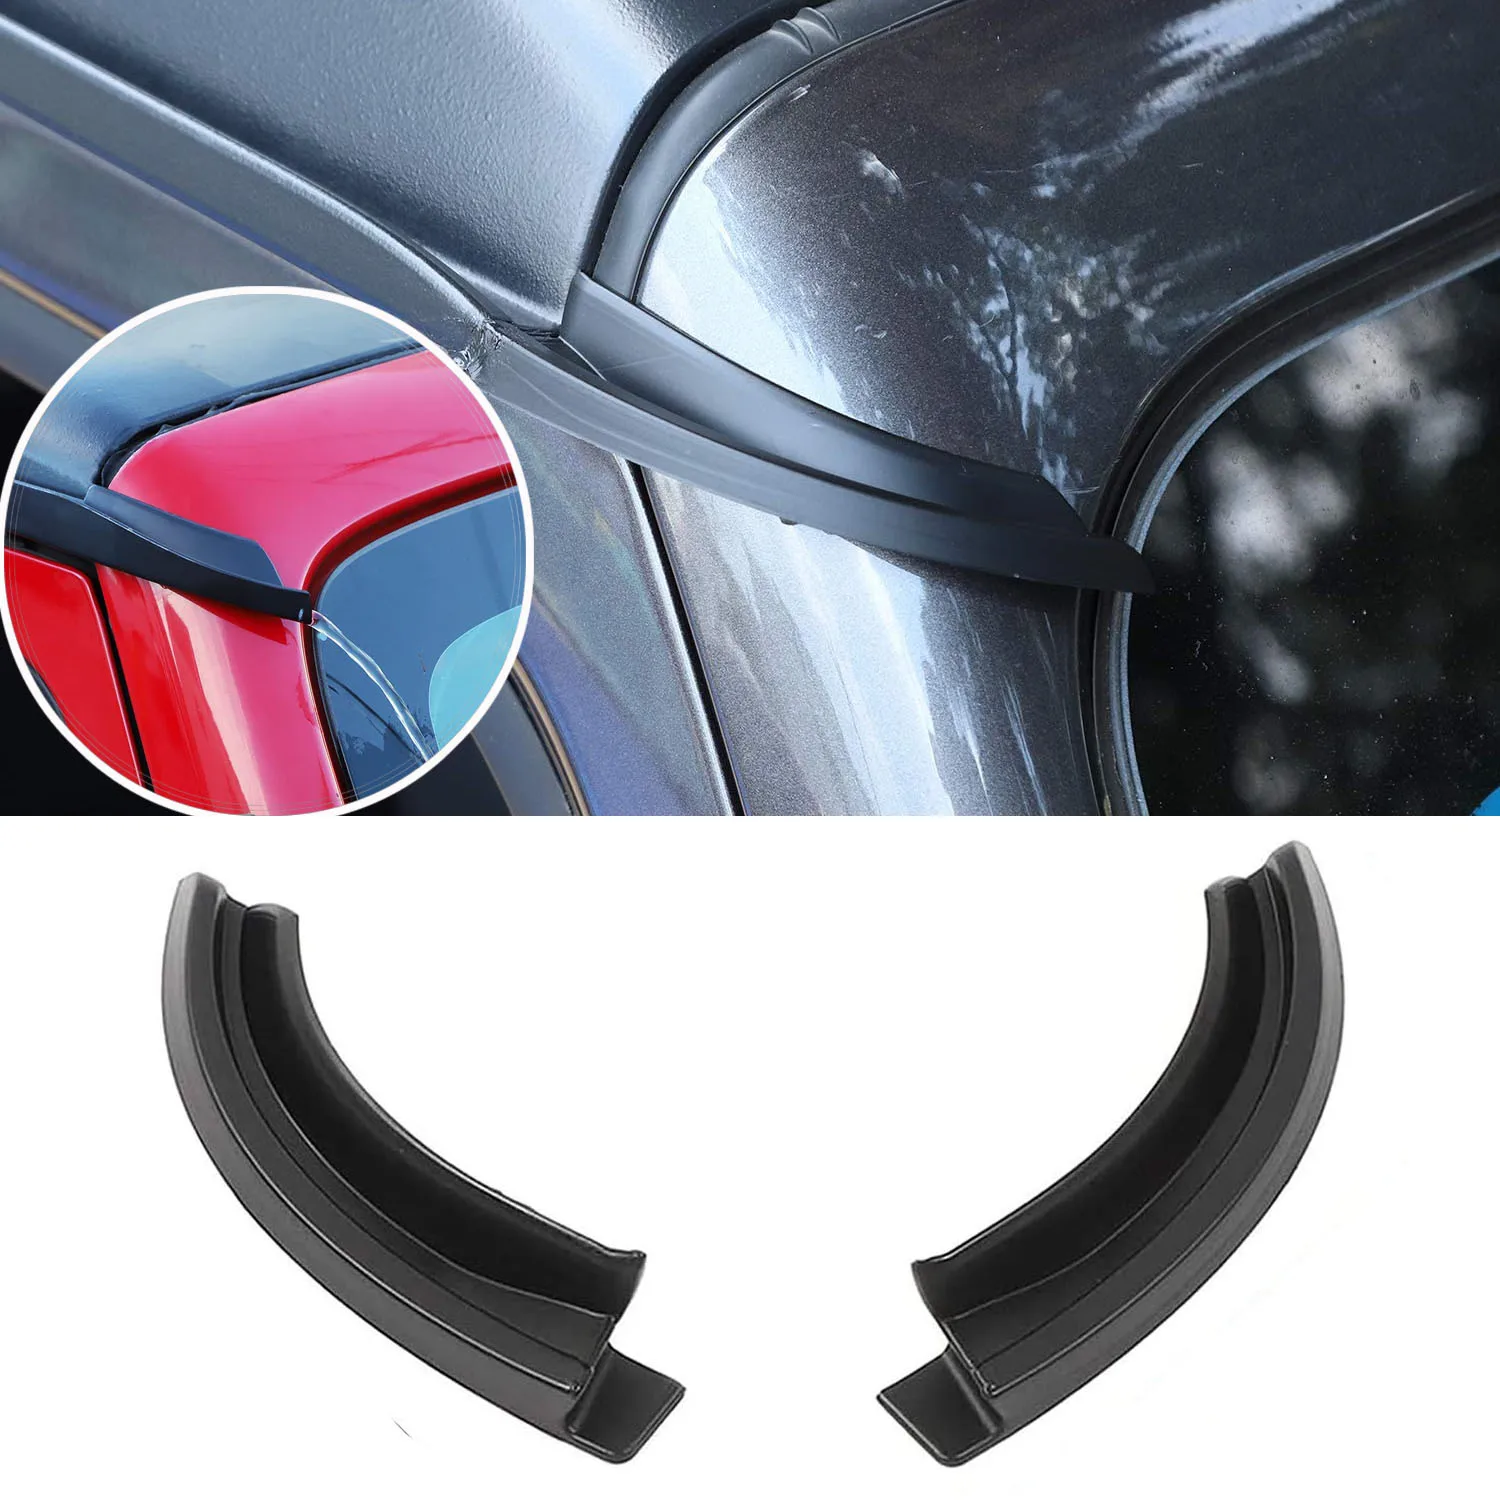 Hard-Top Roof Rainwater Guard ABS Diverters Channel Slot Gutter for Jeep Wrangler JK JL 2007-2017 2018-2023 Drip Rail Extension